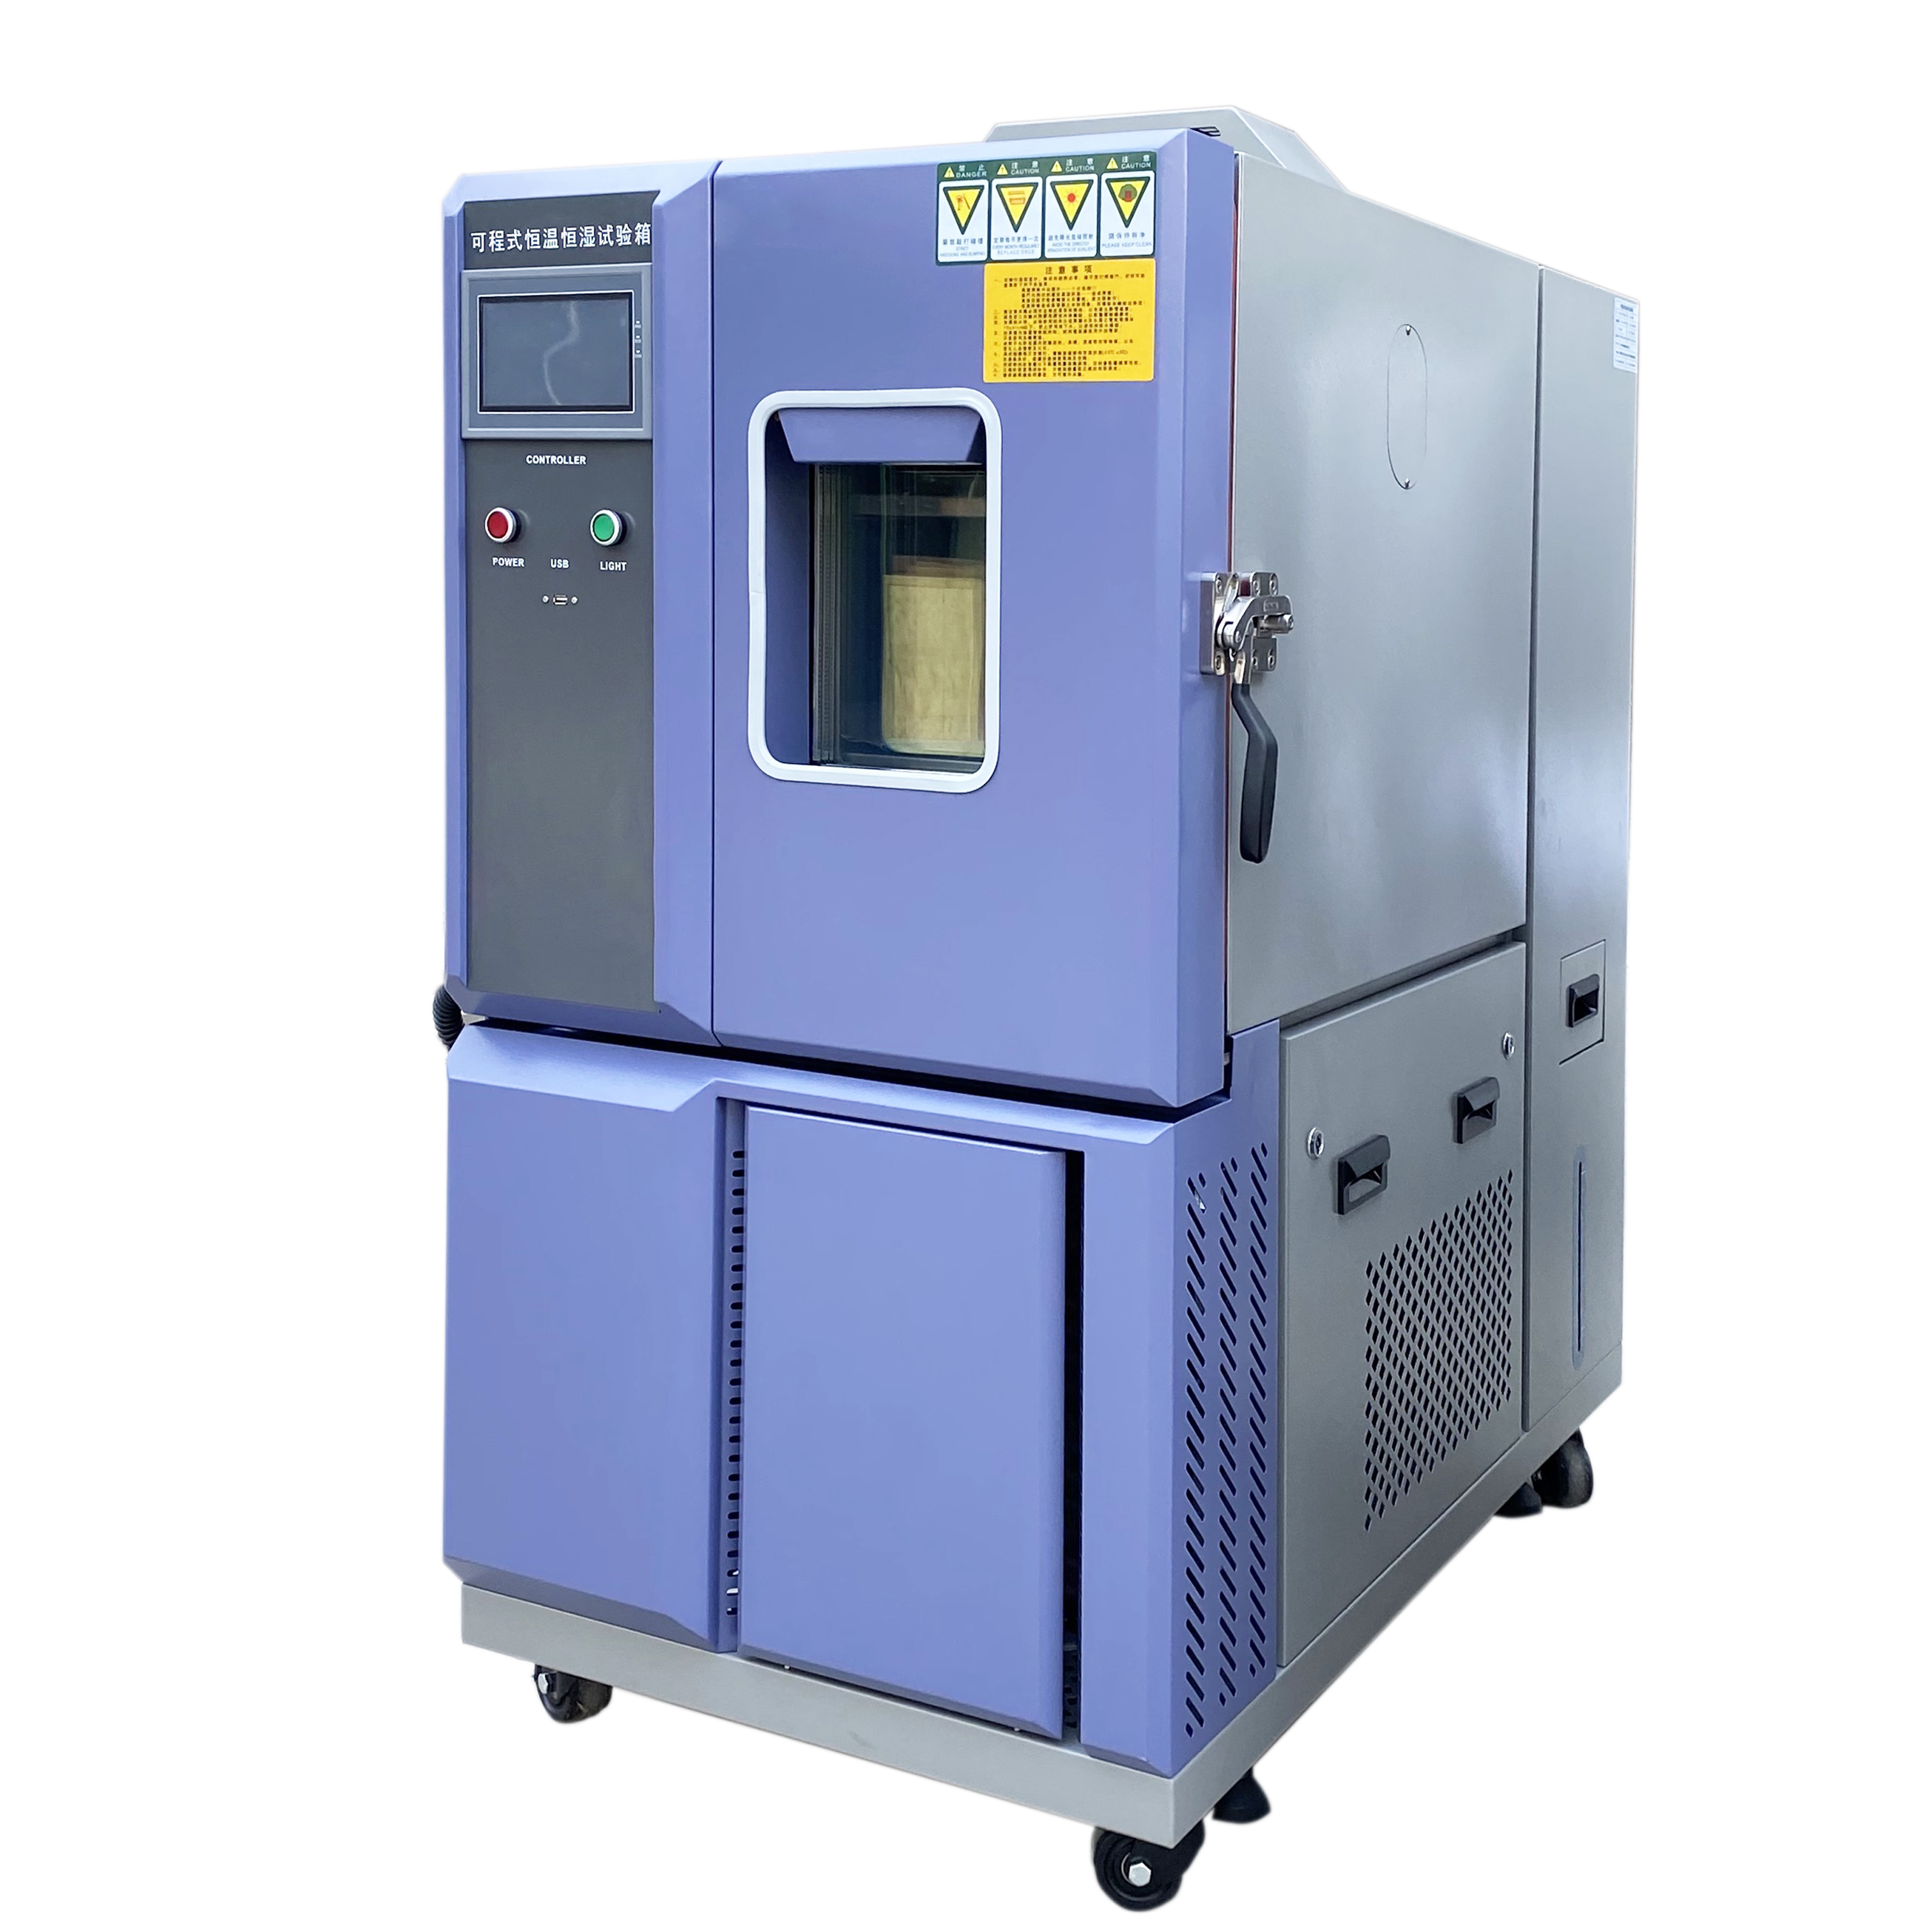 New Delivery for 250l Lab Device Exposure Ozone Test Equipment - Alternating High-low Temperature Testing Environment Auto Temperature And Humidity Controls Stability Chamber Price – Hongjin